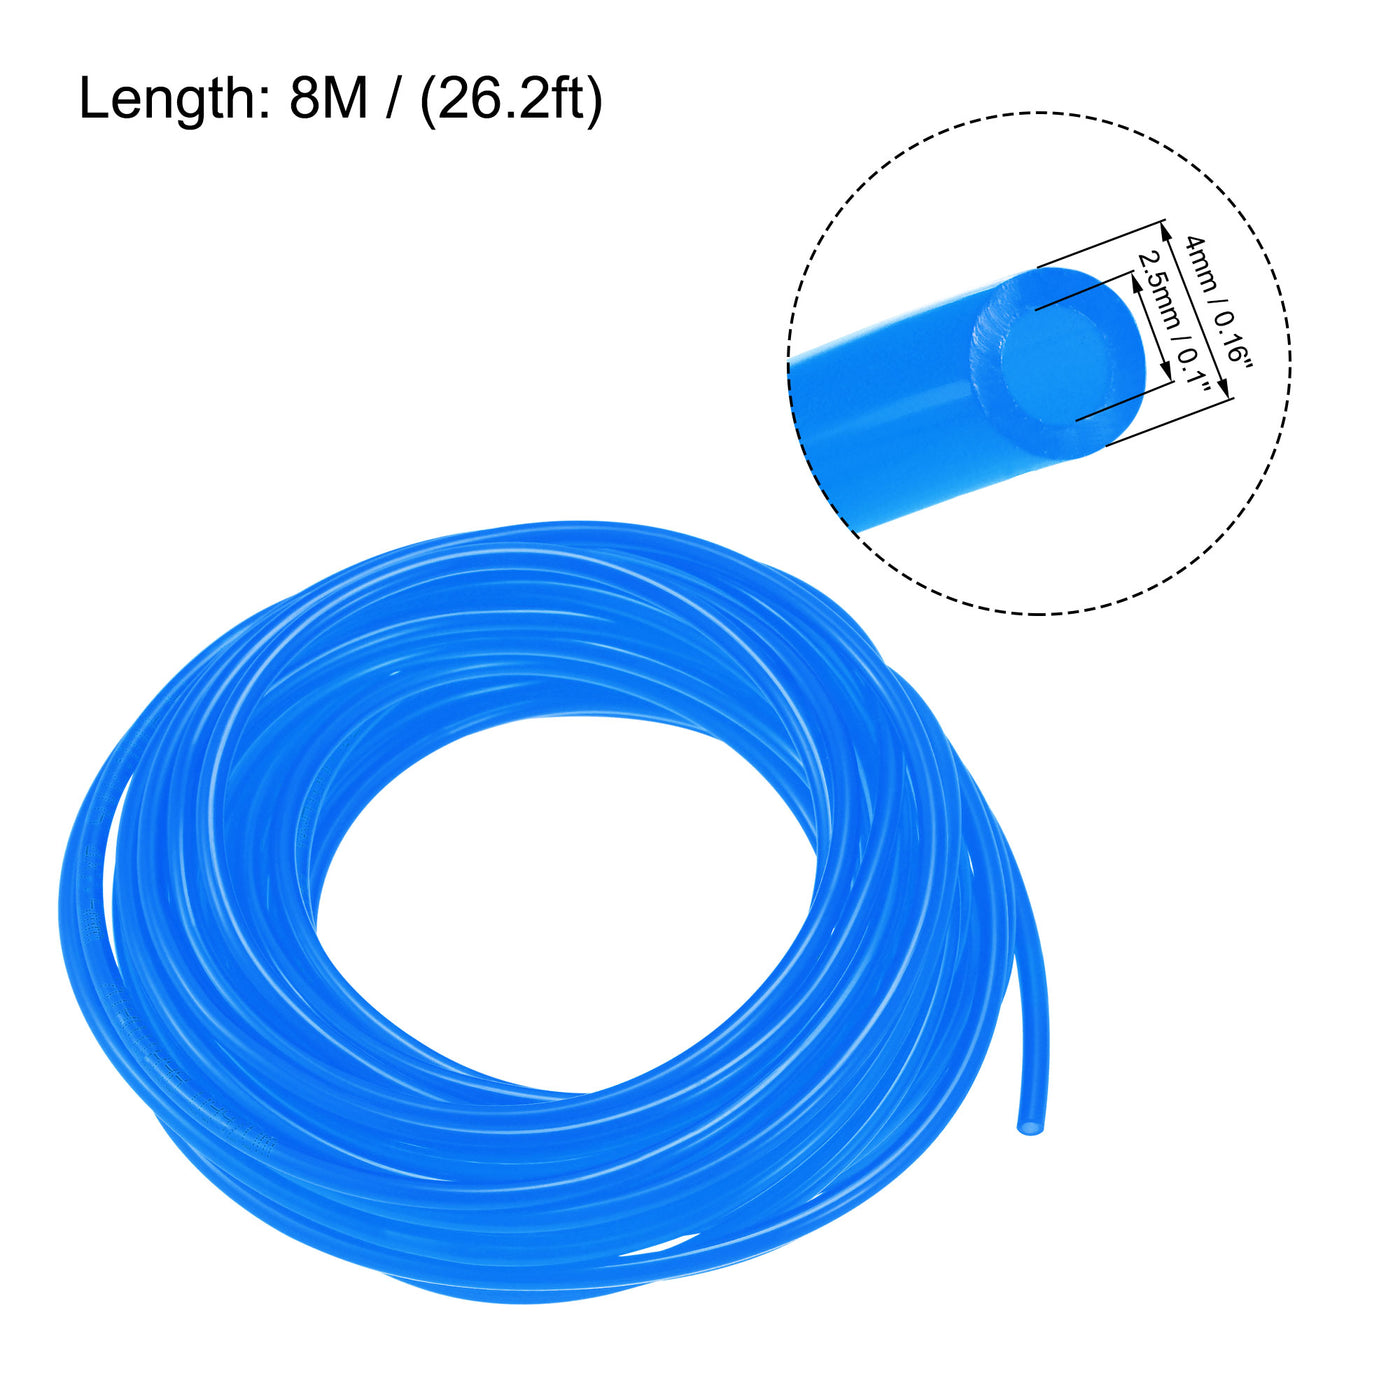 uxcell Uxcell Pneumatic Air Hose Tubing Air Compressor Tube 2.5mm/0.1''ID x 4mm/0.16''OD x 8m/26.2Ft Polyurethane Pipe Blue